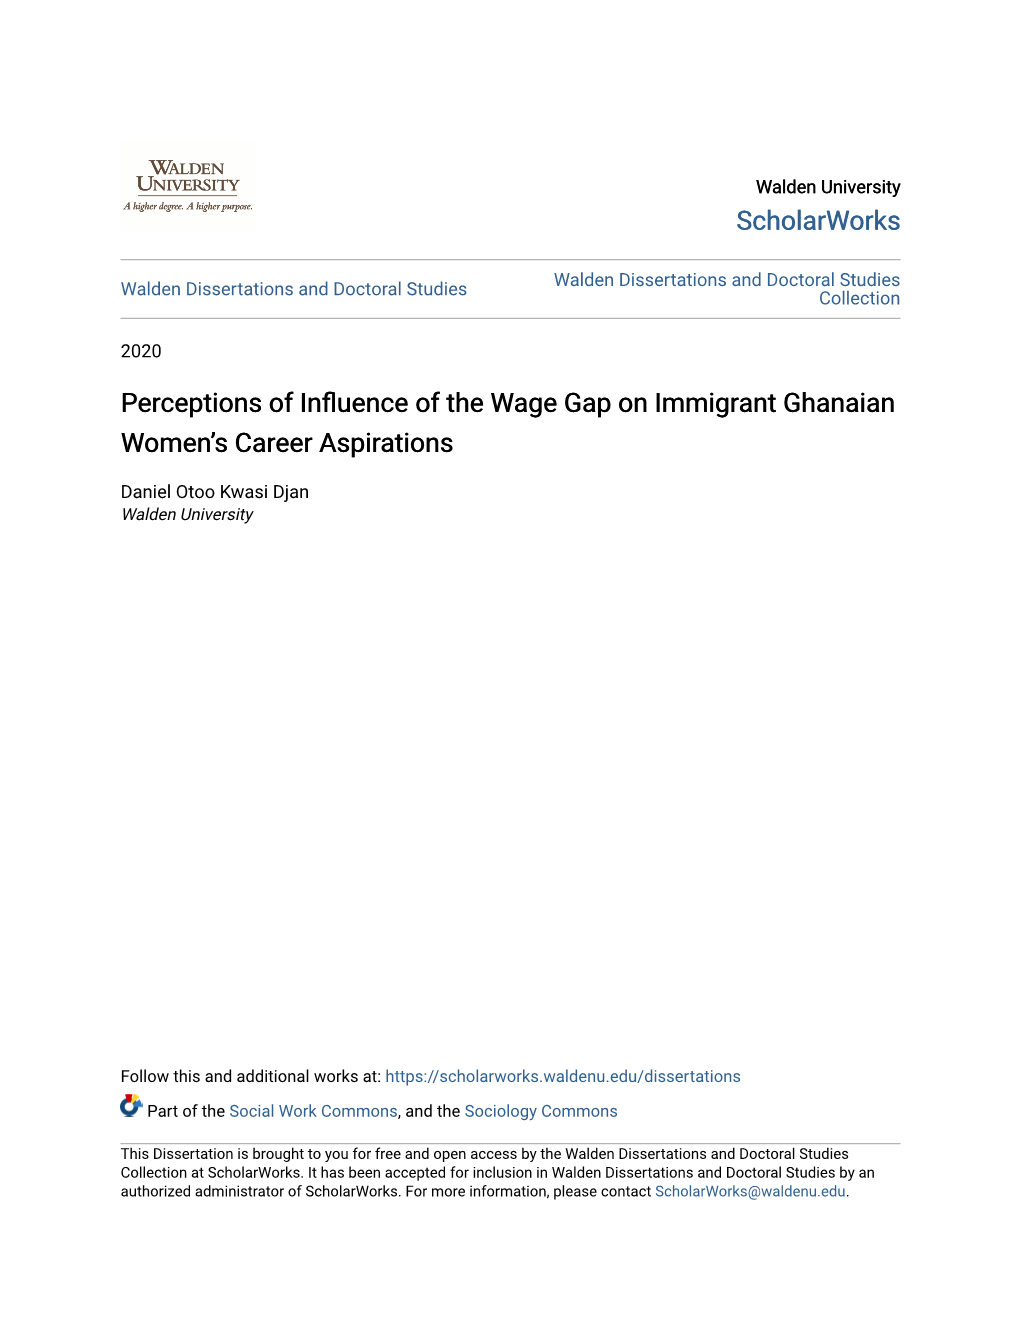 Perceptions of Influence of the Wage Gap on Immigrant Ghanaian Women’S Career